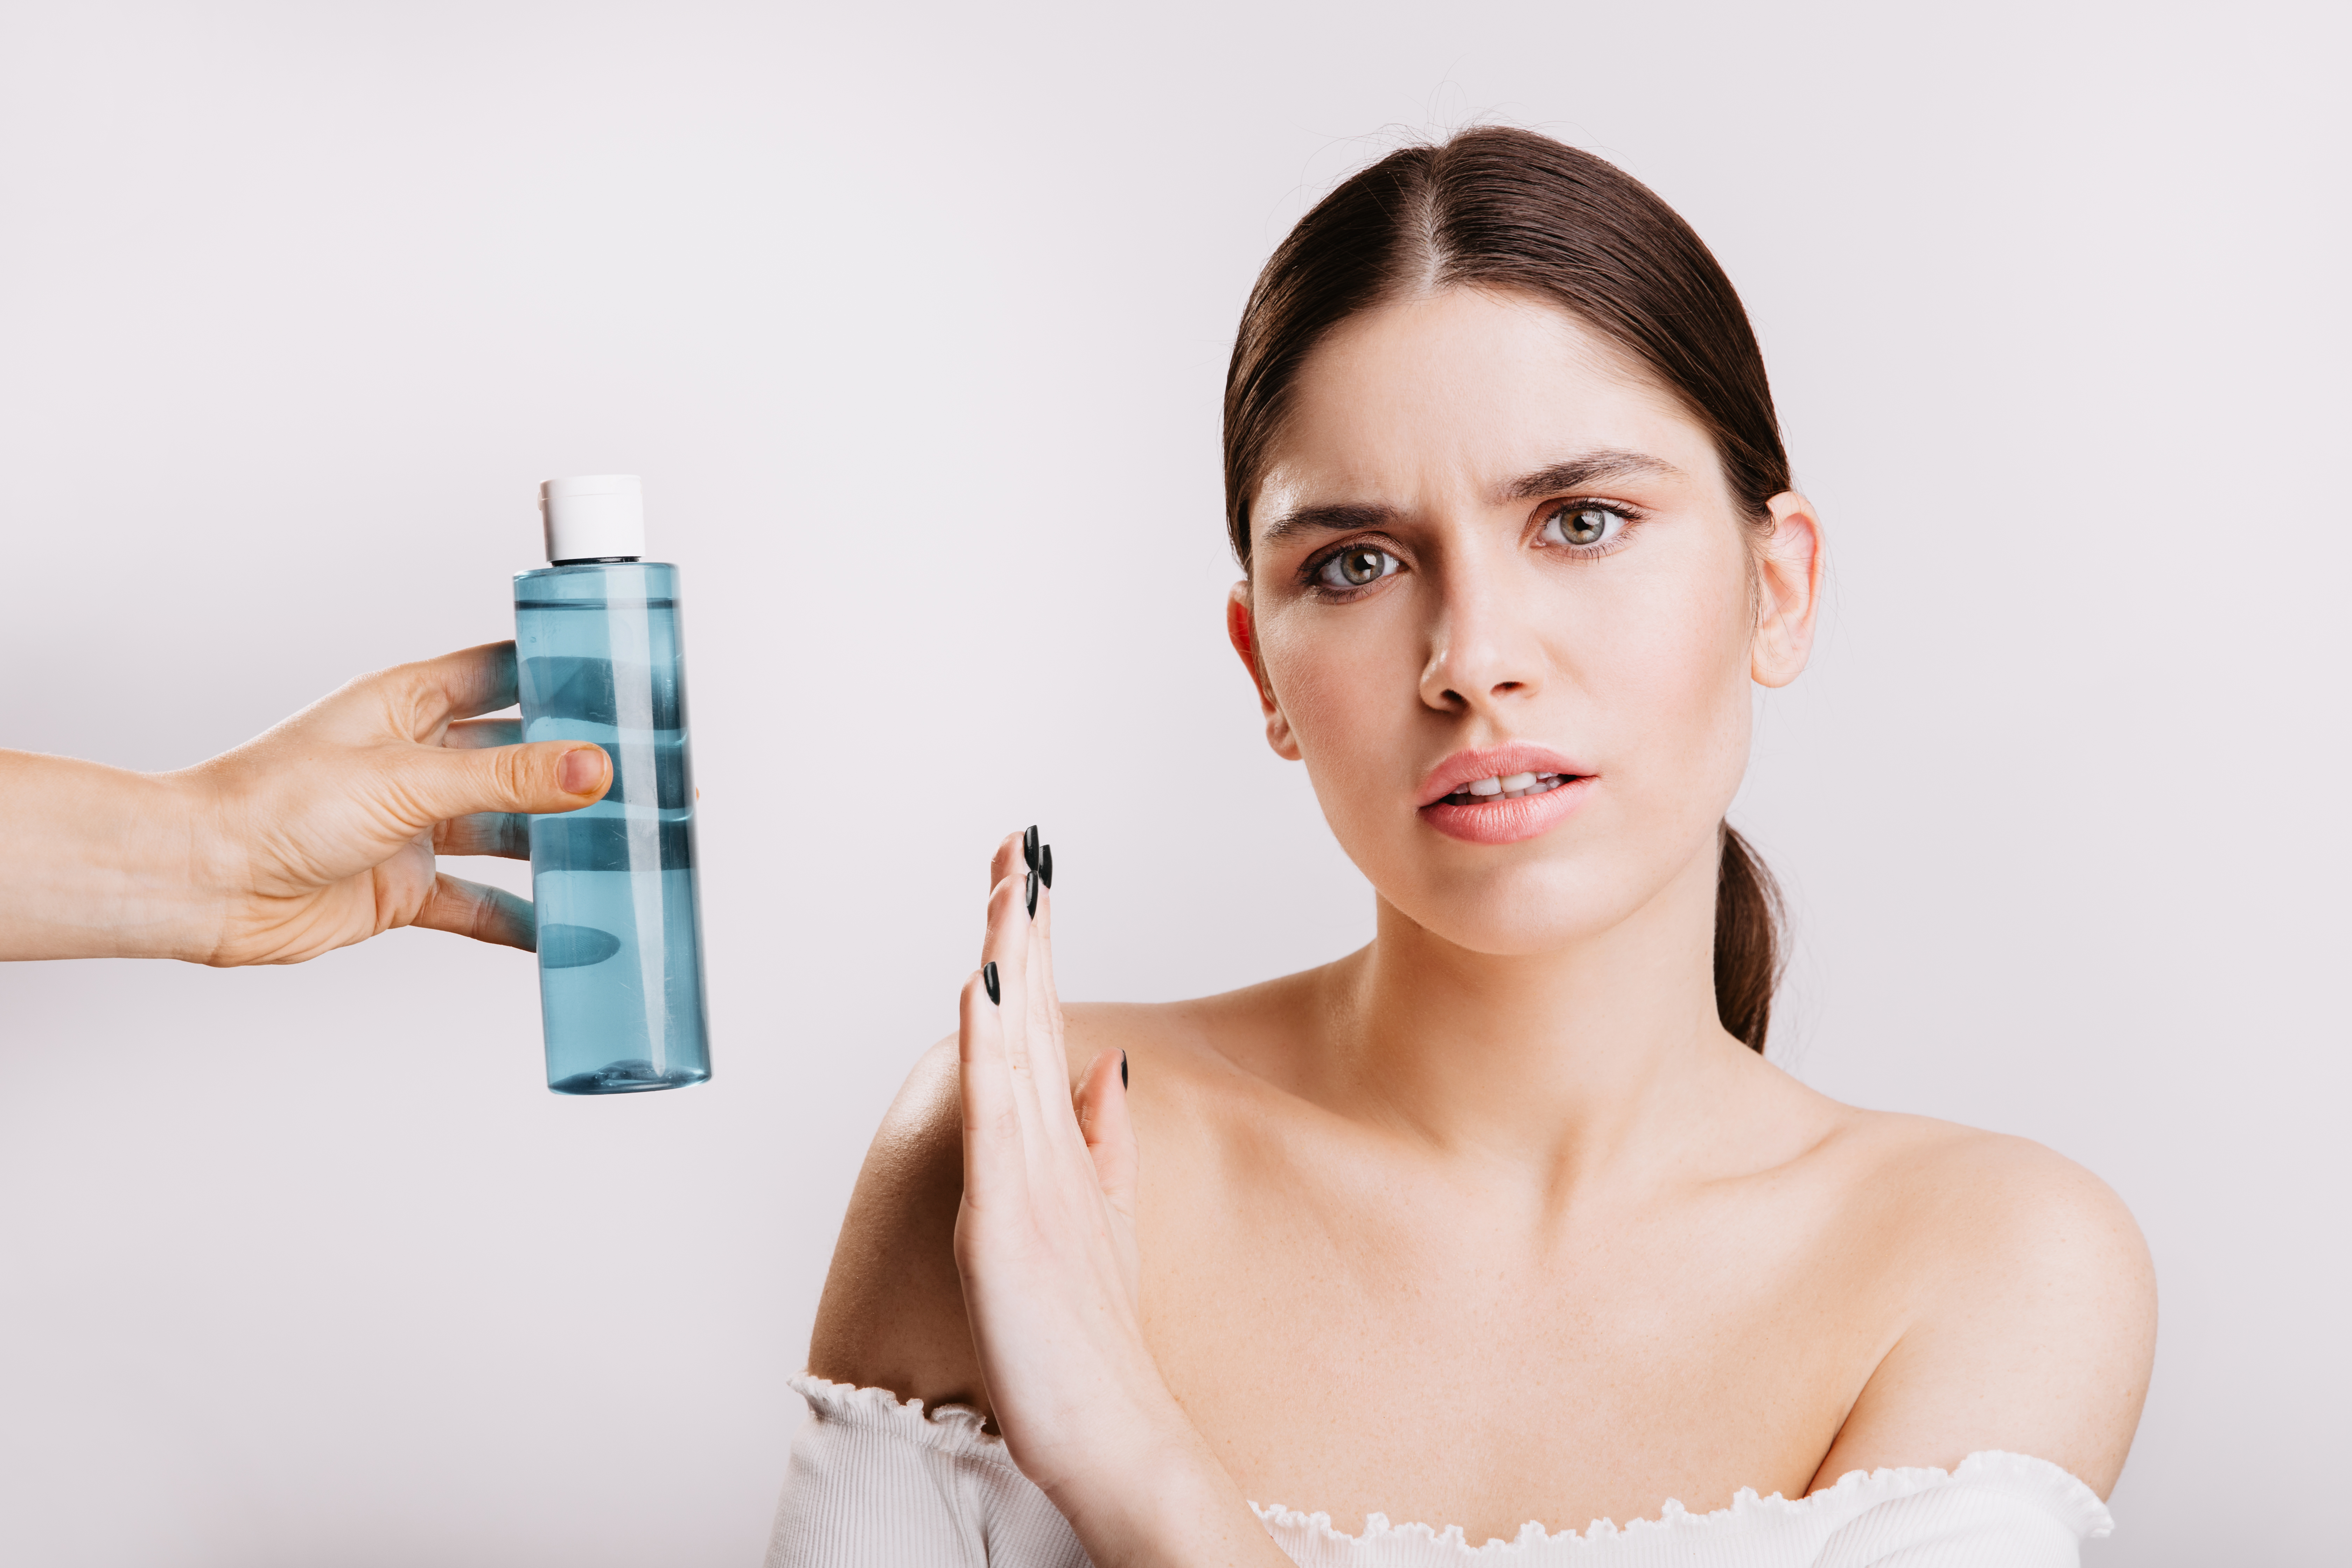 Portrait of girl with displeased facial expression on white background with micellar water. Woman without makeup against use of cosmetics